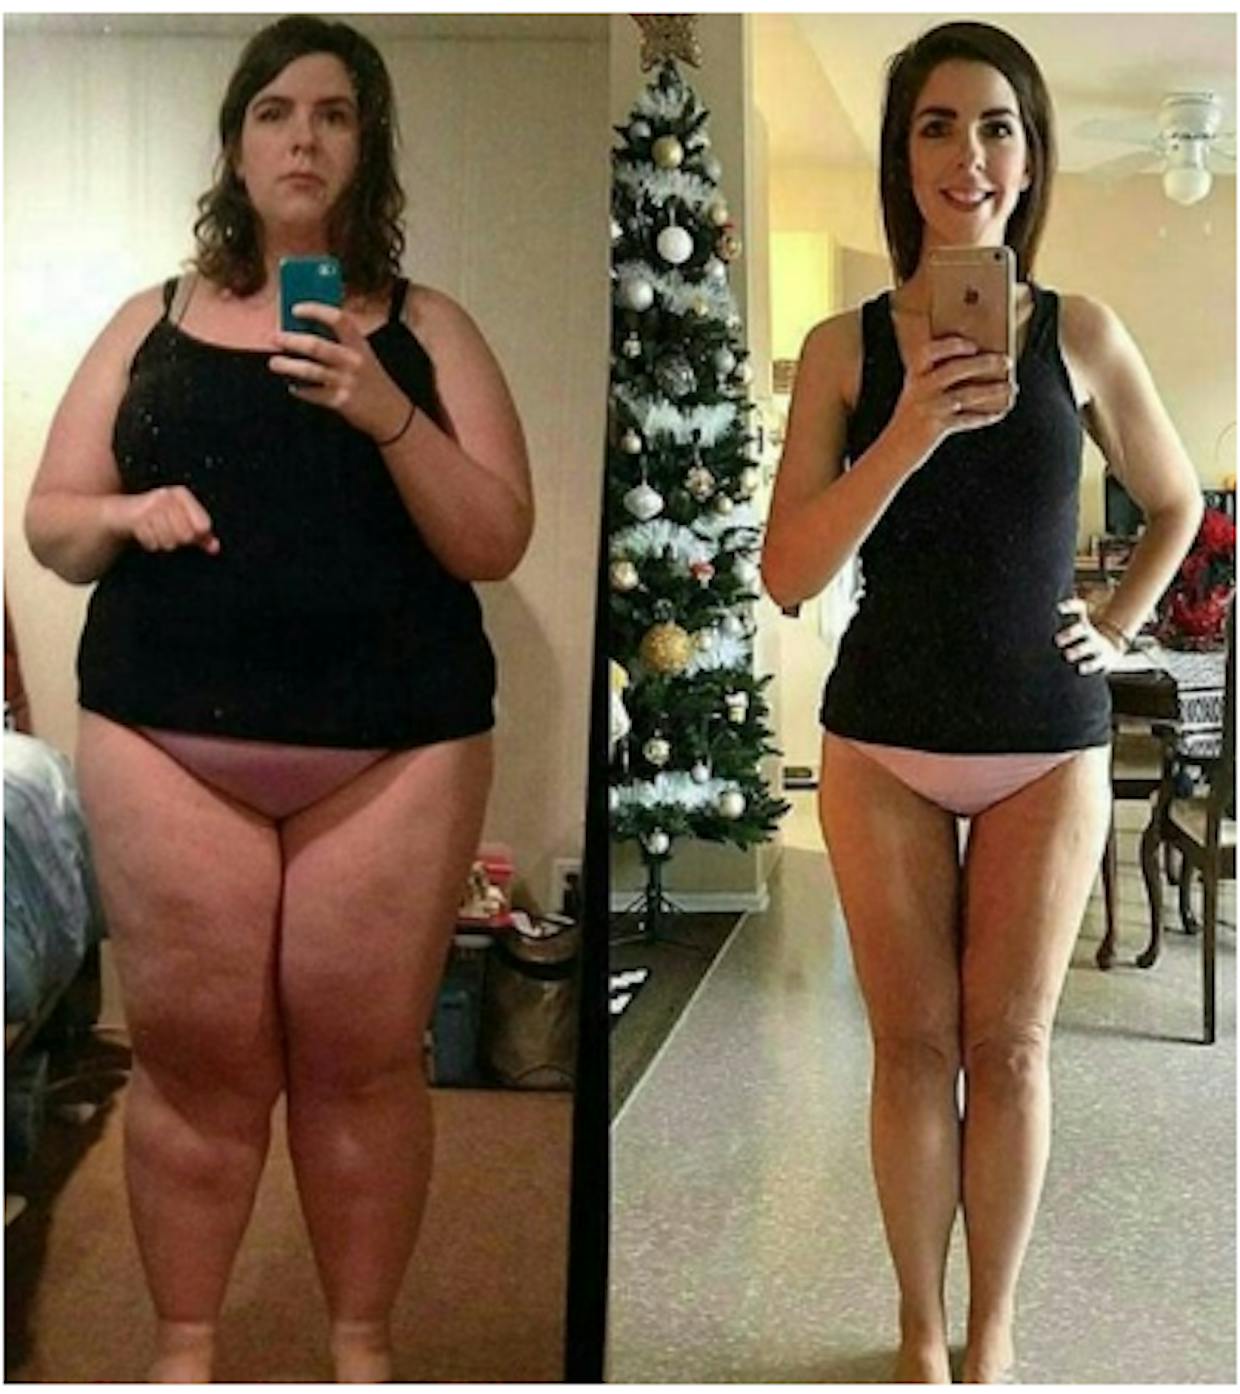 Where Can I Buy Great Results, Keto?